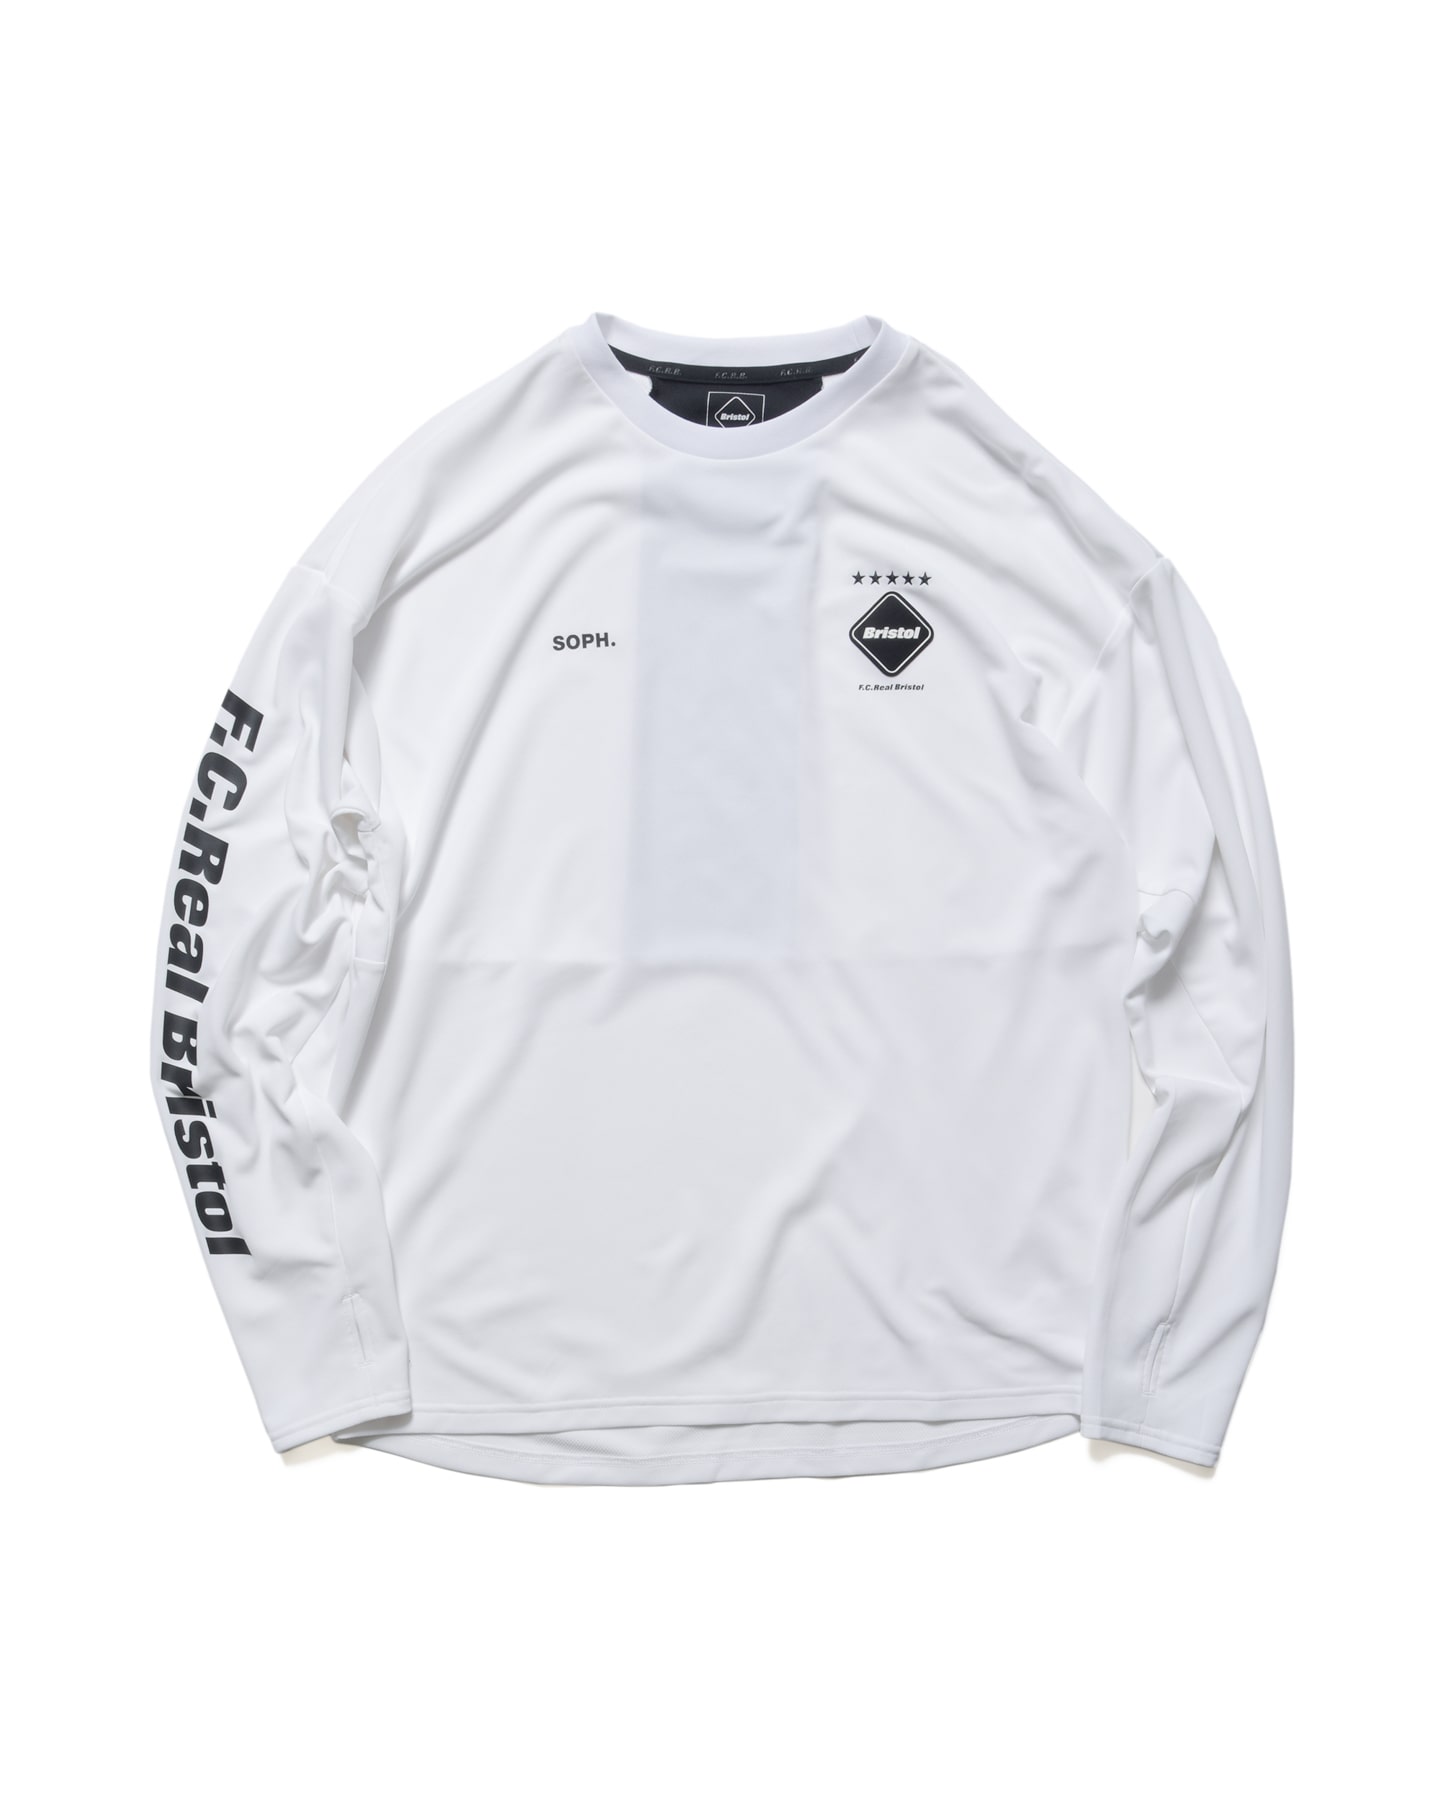 XL 送料無料 FCRB 23AW L/S TEAM PRACTICE TOP-